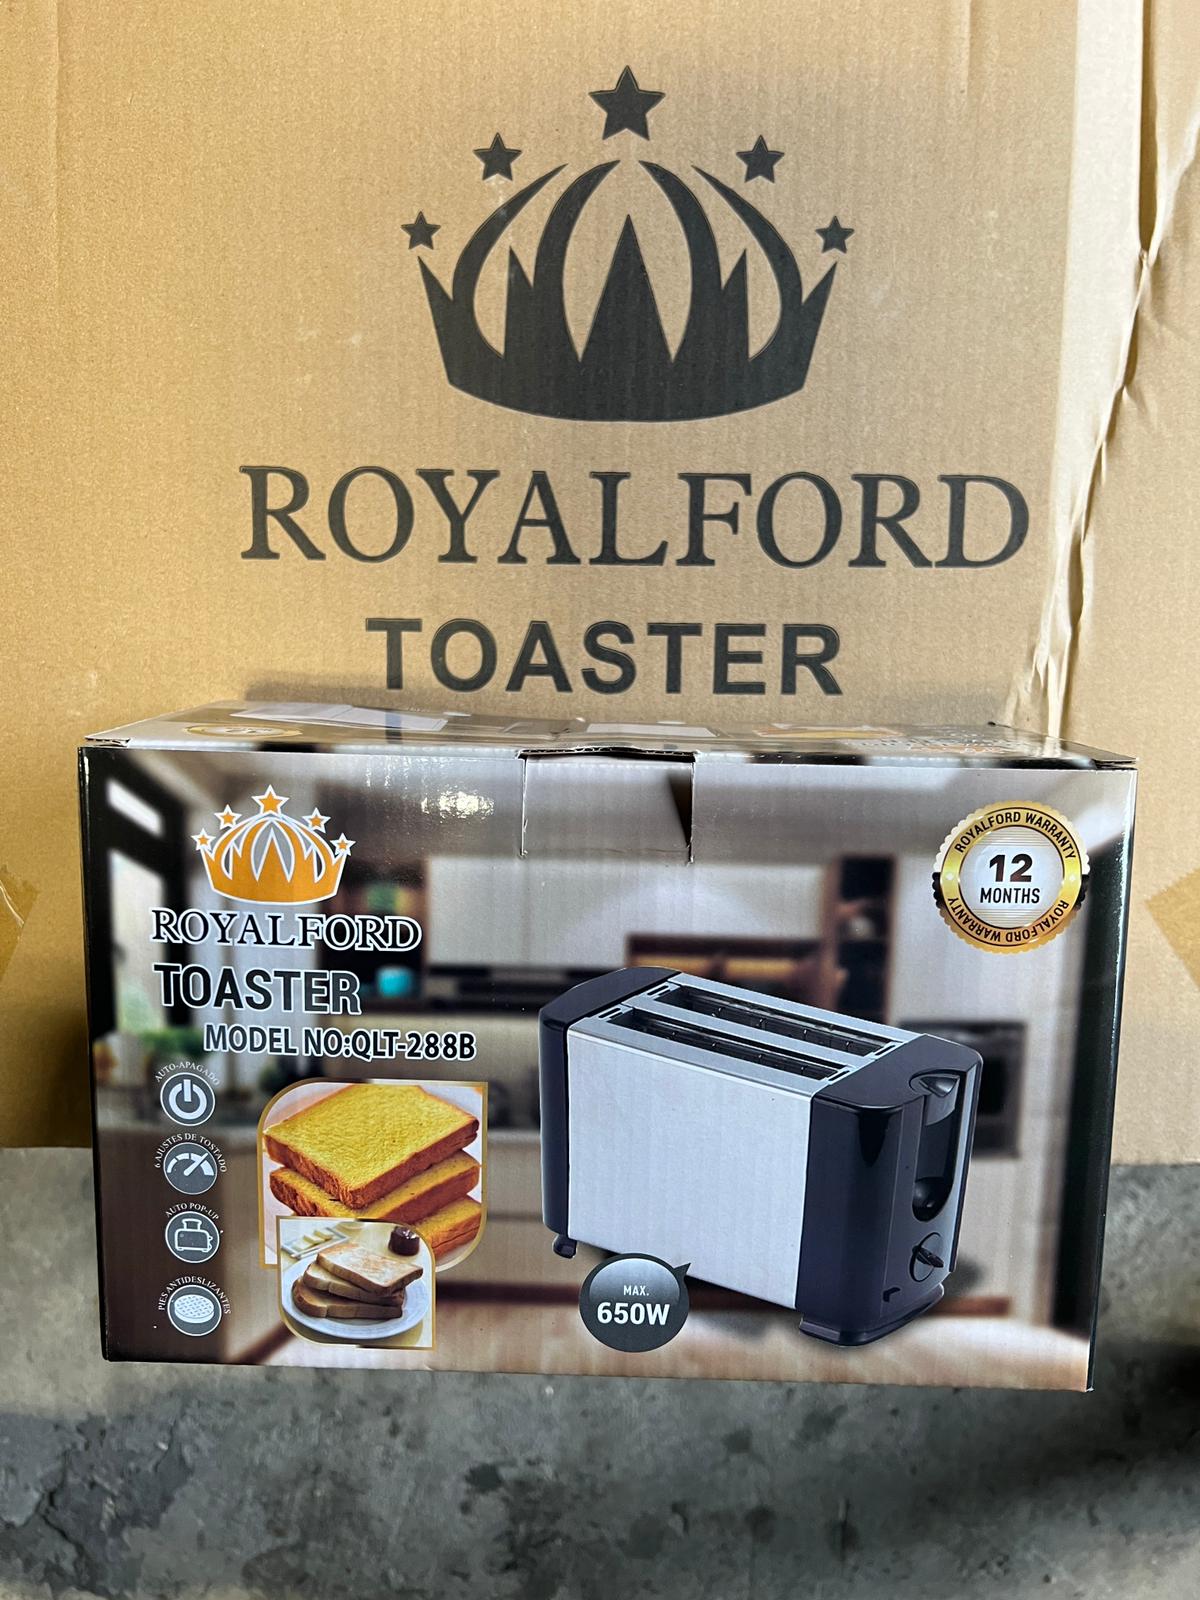 Wholesale Closeout 2 Slice Toaster, 650W Toaster with Double Wide Slots 6 Gears NDGr